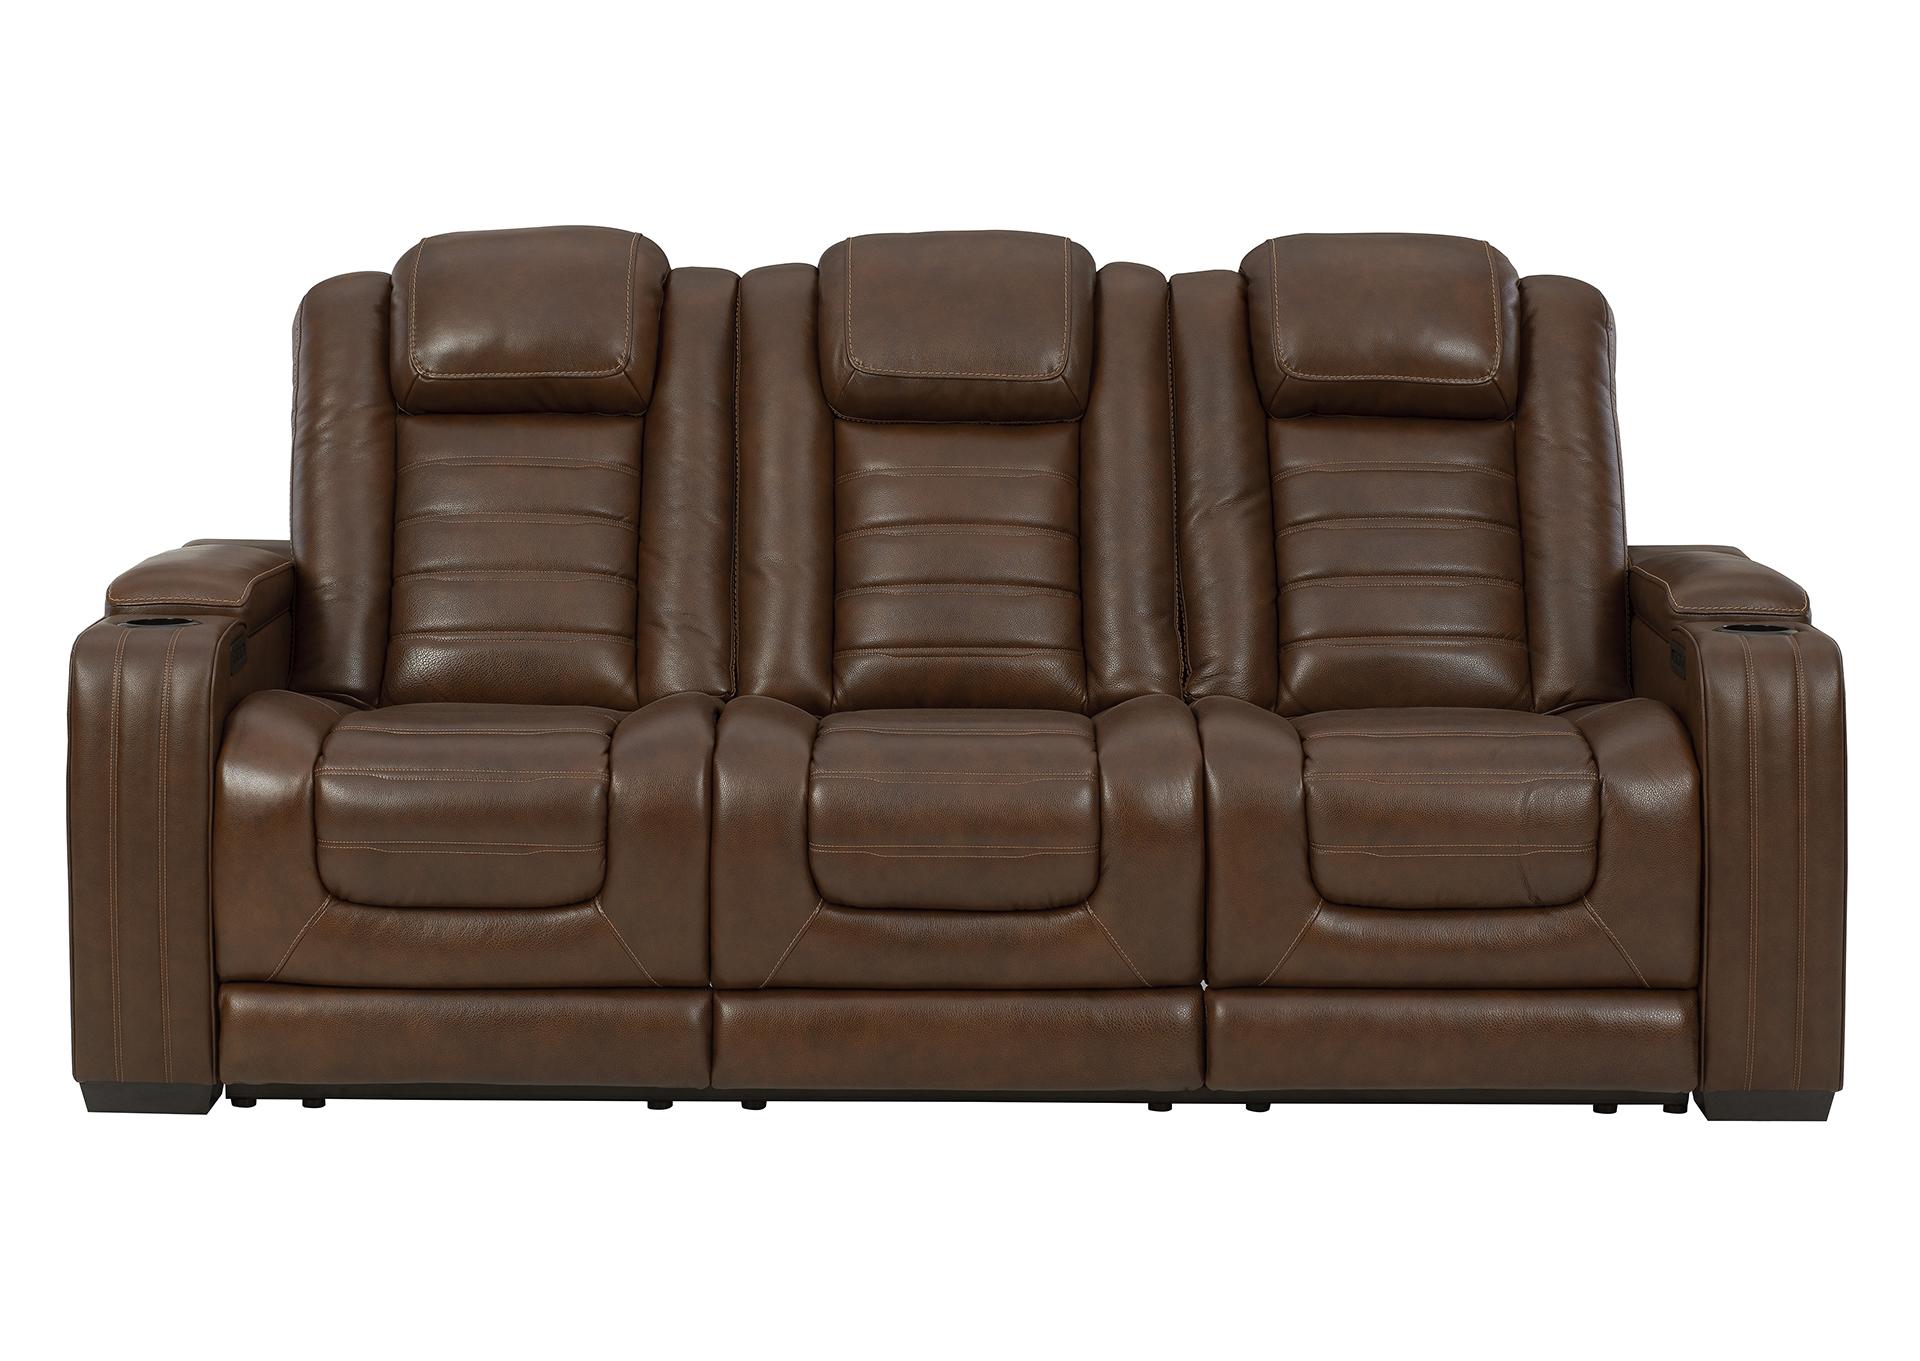 BACKTRACK CHOCOLATE LEATHER POWER RECLINING SOFA